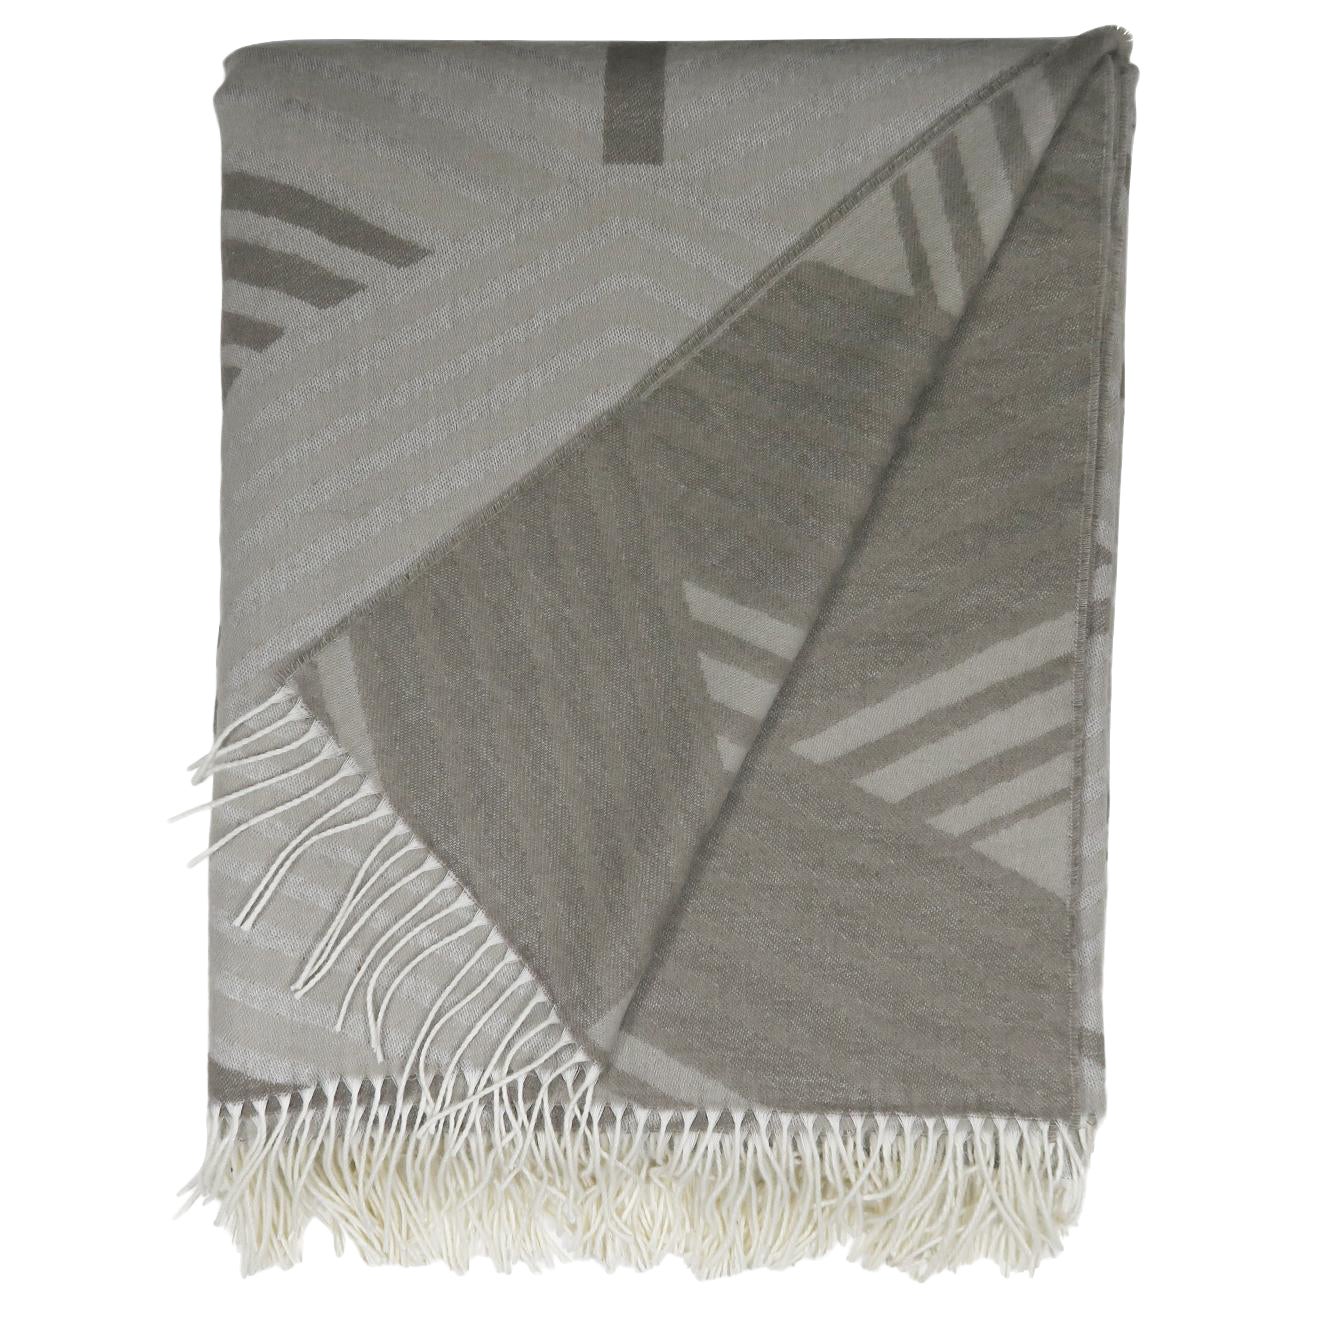 Outdoor Throw / Blanket Grey with Cashmere Touch by Evolution21